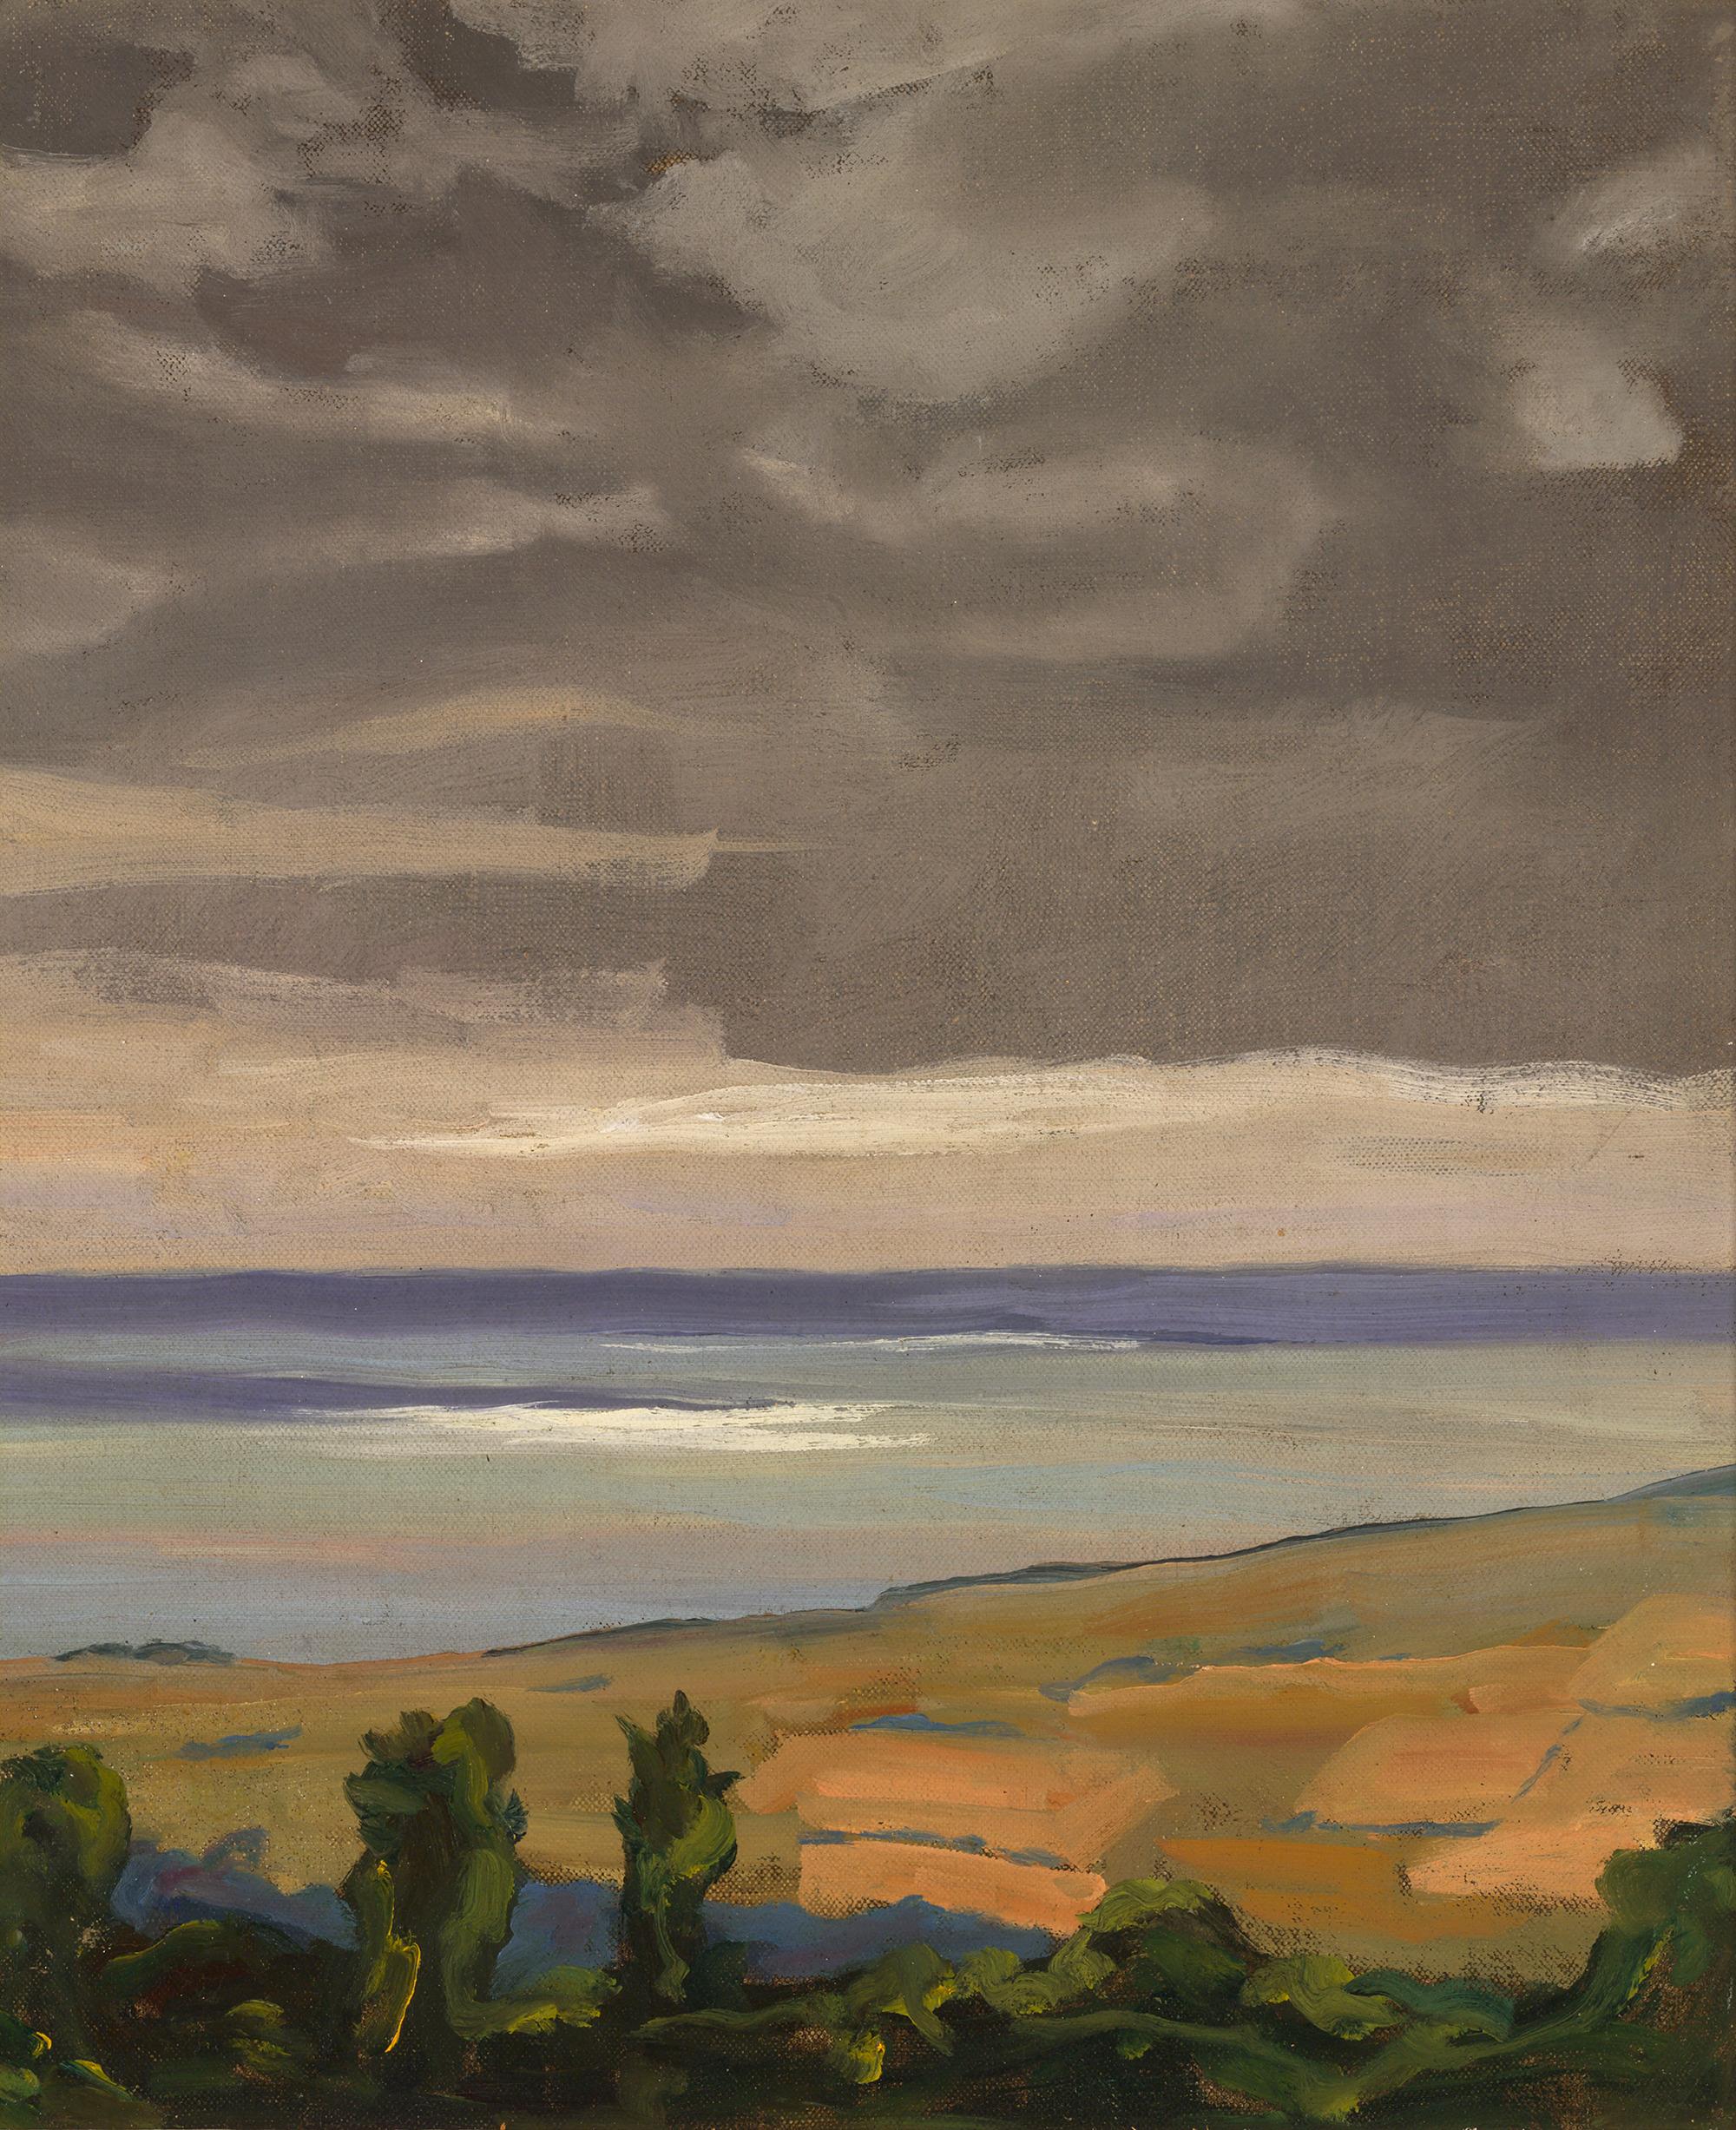 Sir Winston Churchill
1874-1965 | British

Coast Scene near Lympne

Oil on canvas

Immediately recognizable as one of the most important statesmen in world history, Sir Winston Churchill also pursued the art of painting for more than 40 years. A